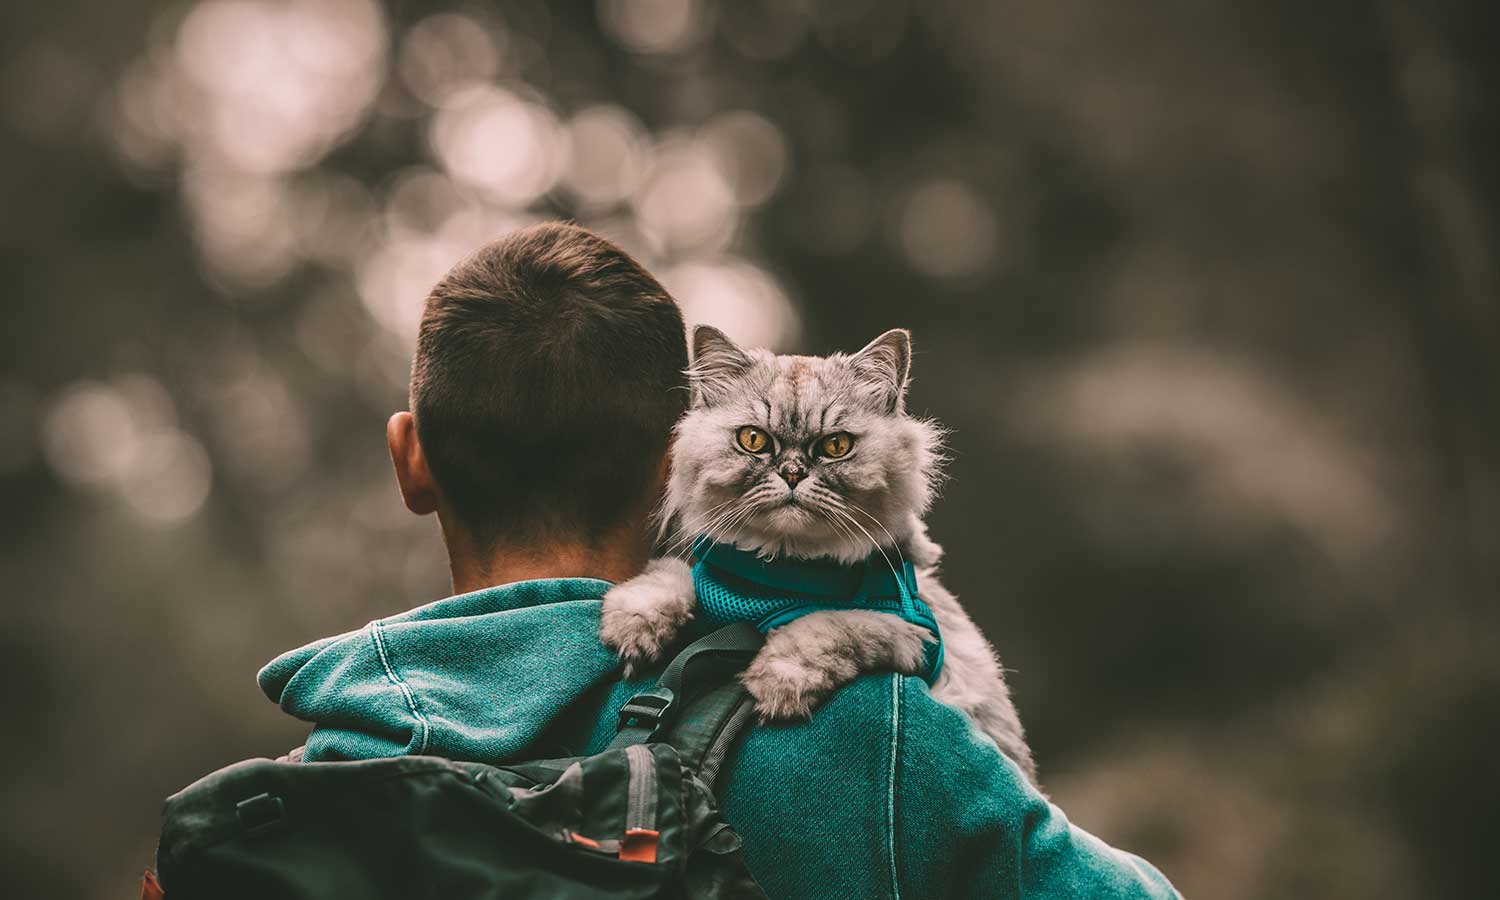 A cat out with their human in nature